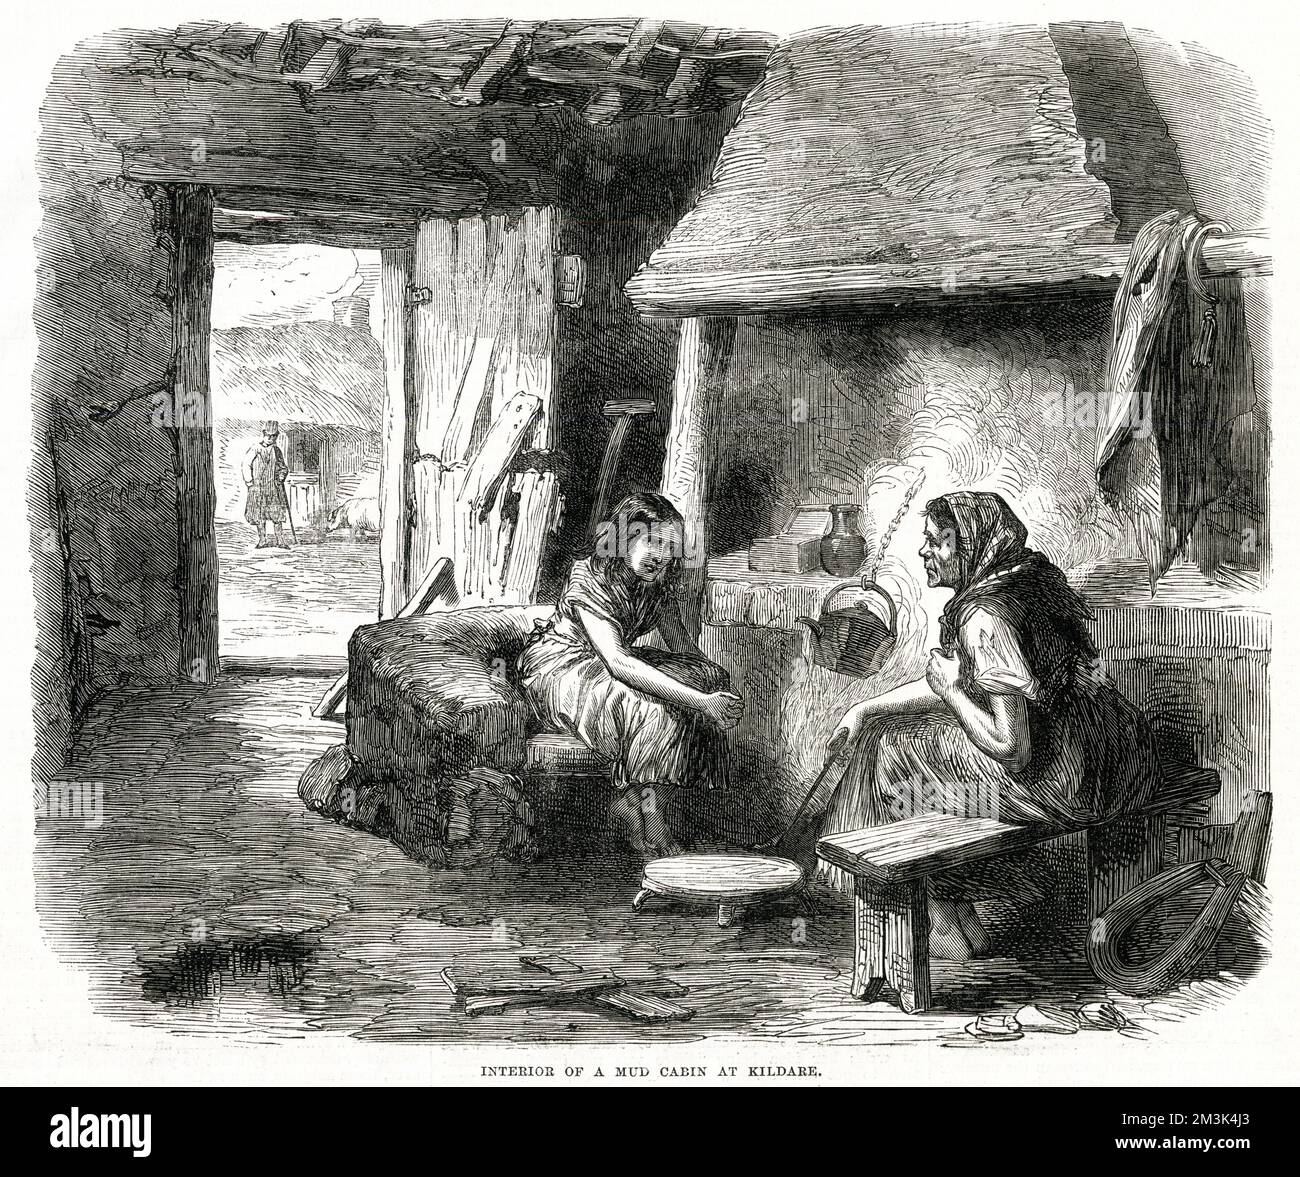 A woman and young girl indoors in a mud cabin in Kildare. They sit next to the fire over which a kettle hangs on a chain. This is a poor ramshackle dwelling with the door nearly falling apart and a view of a man and a pig outside.     Date: 1870 Stock Photo